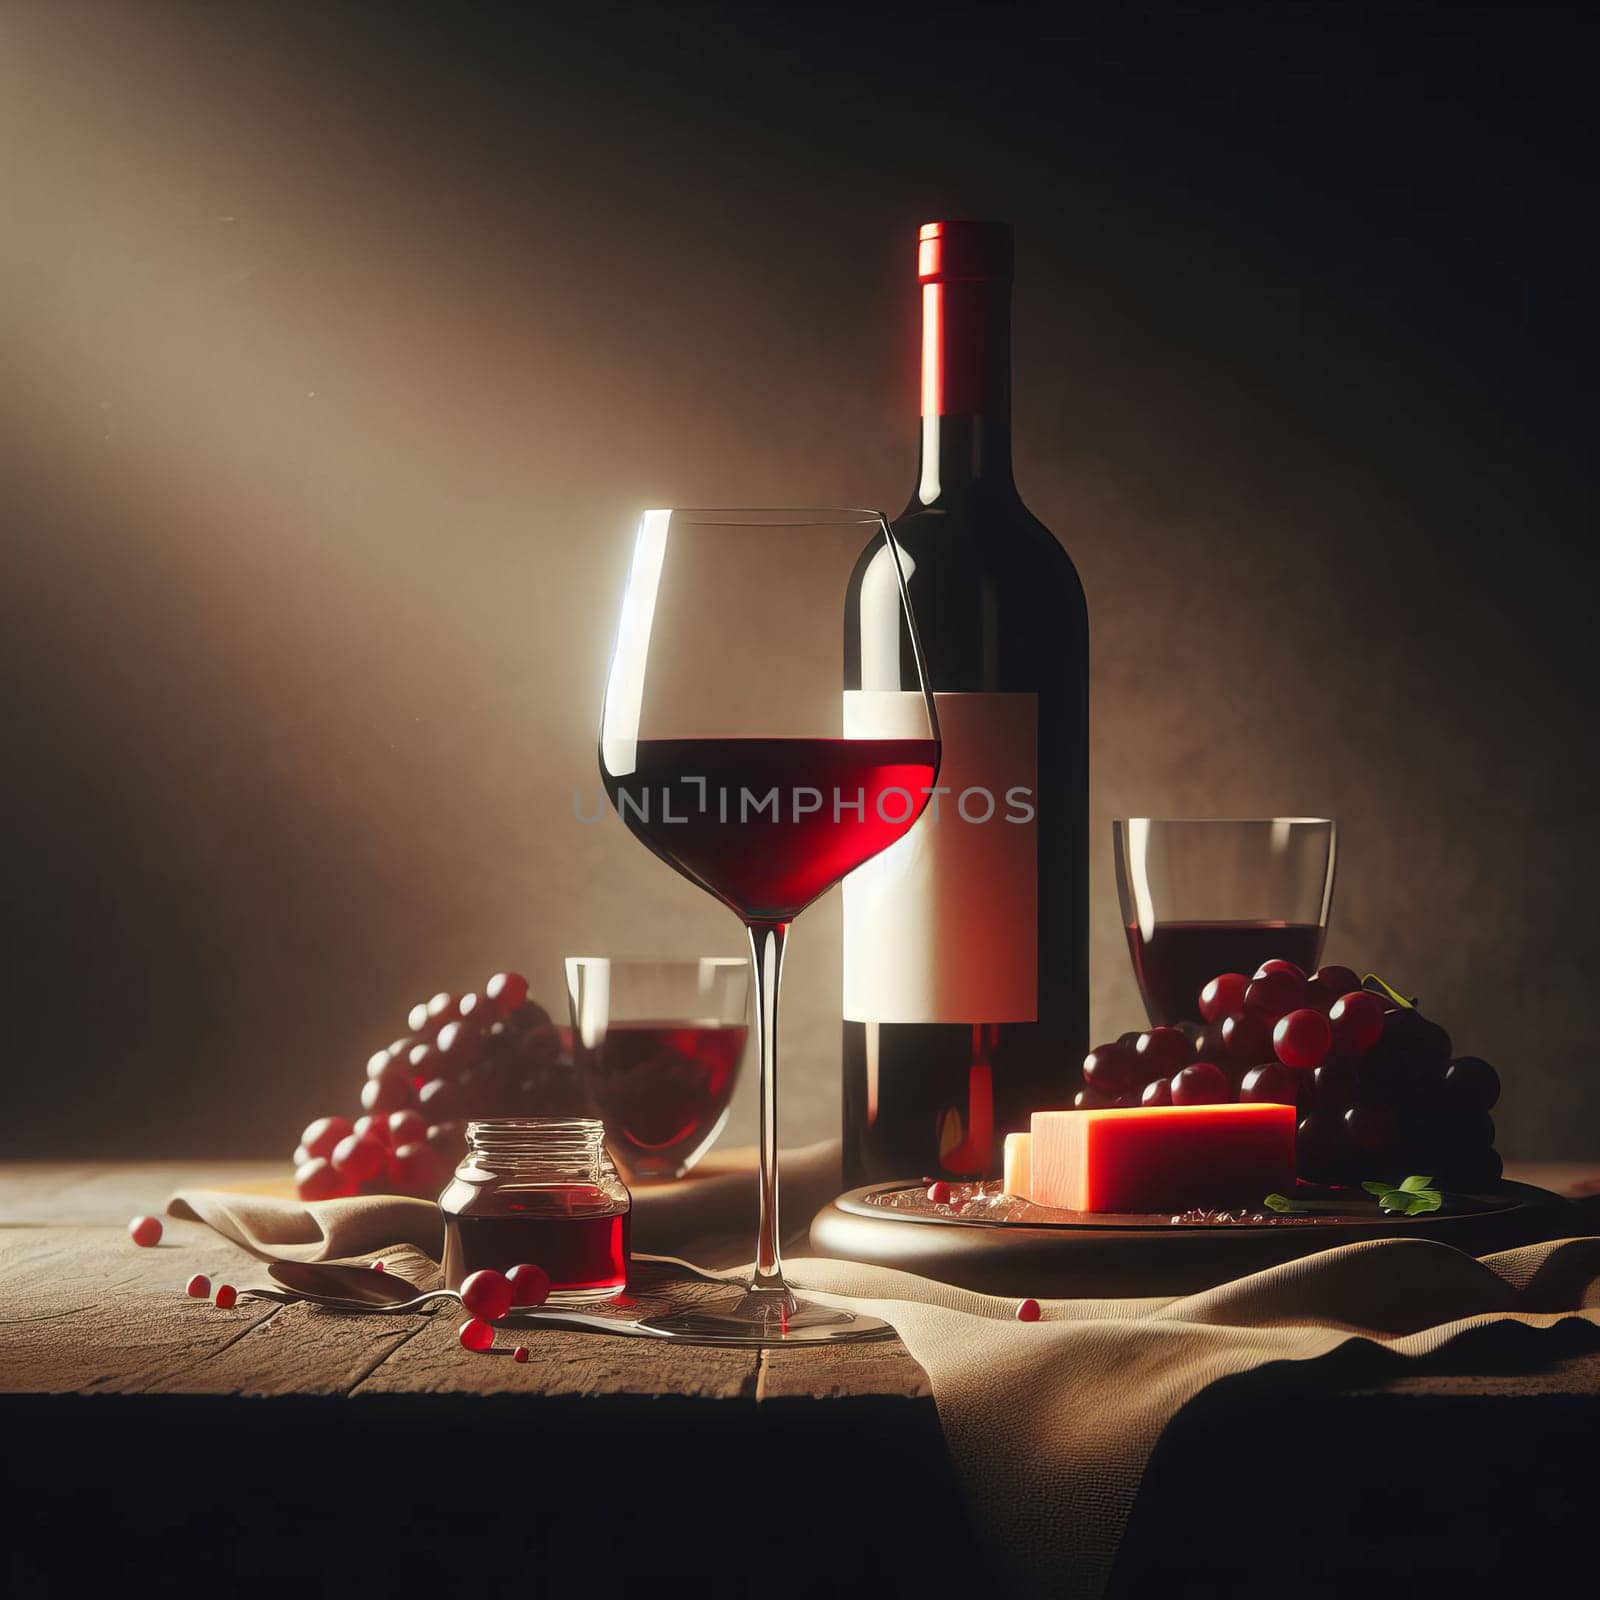 Elegant and romantic setting with a wine bottle, glass, and grapes on a table, under soft lighting. by sfinks